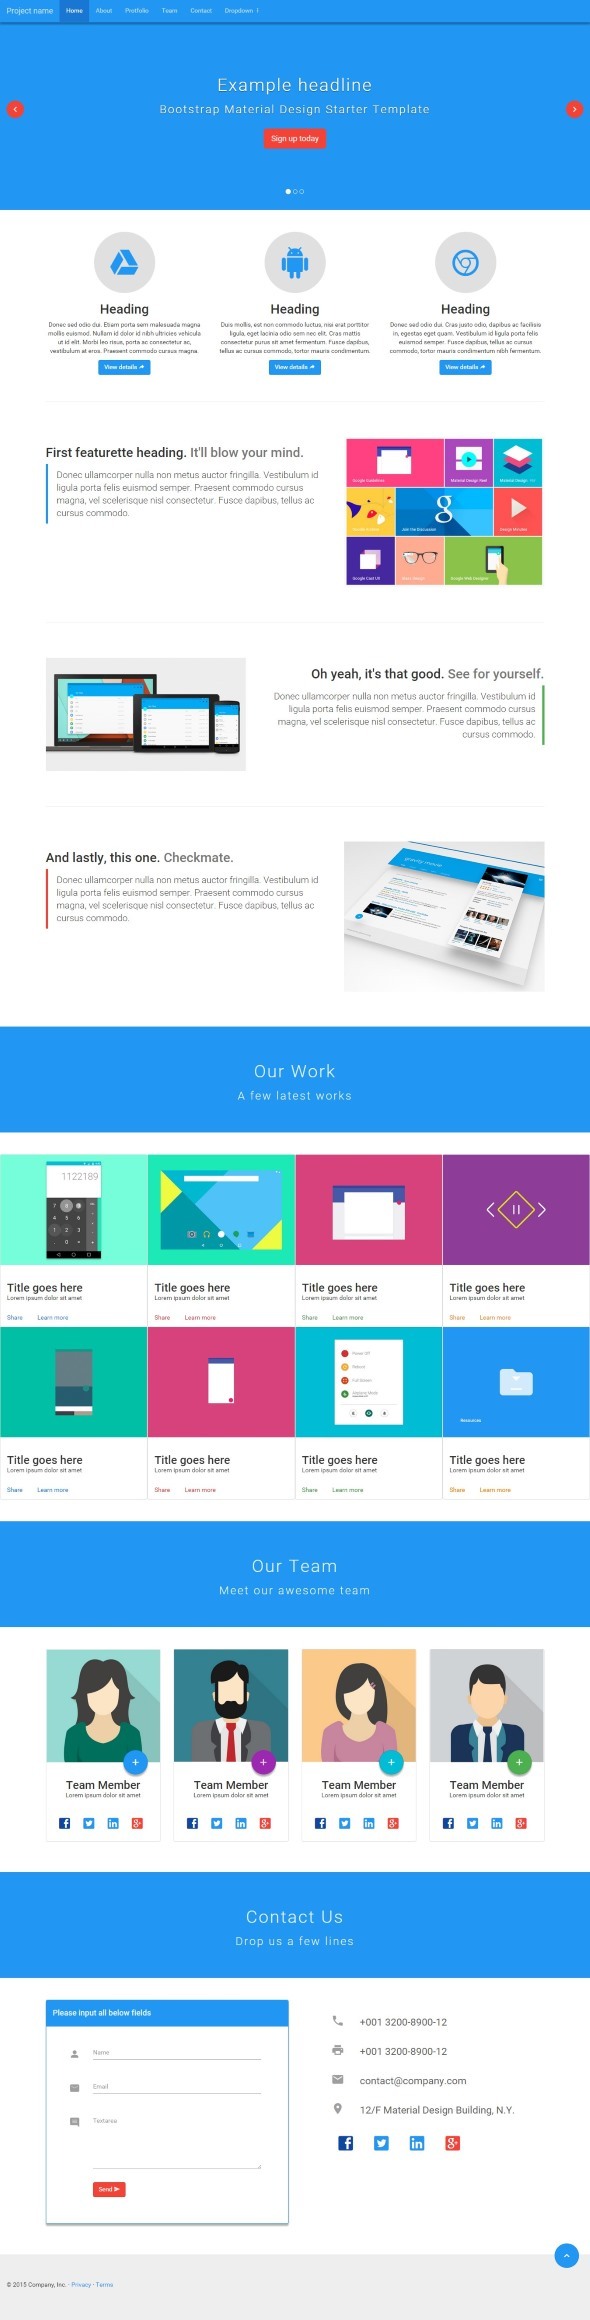 BMD - Bootstrap + Material Design - 9